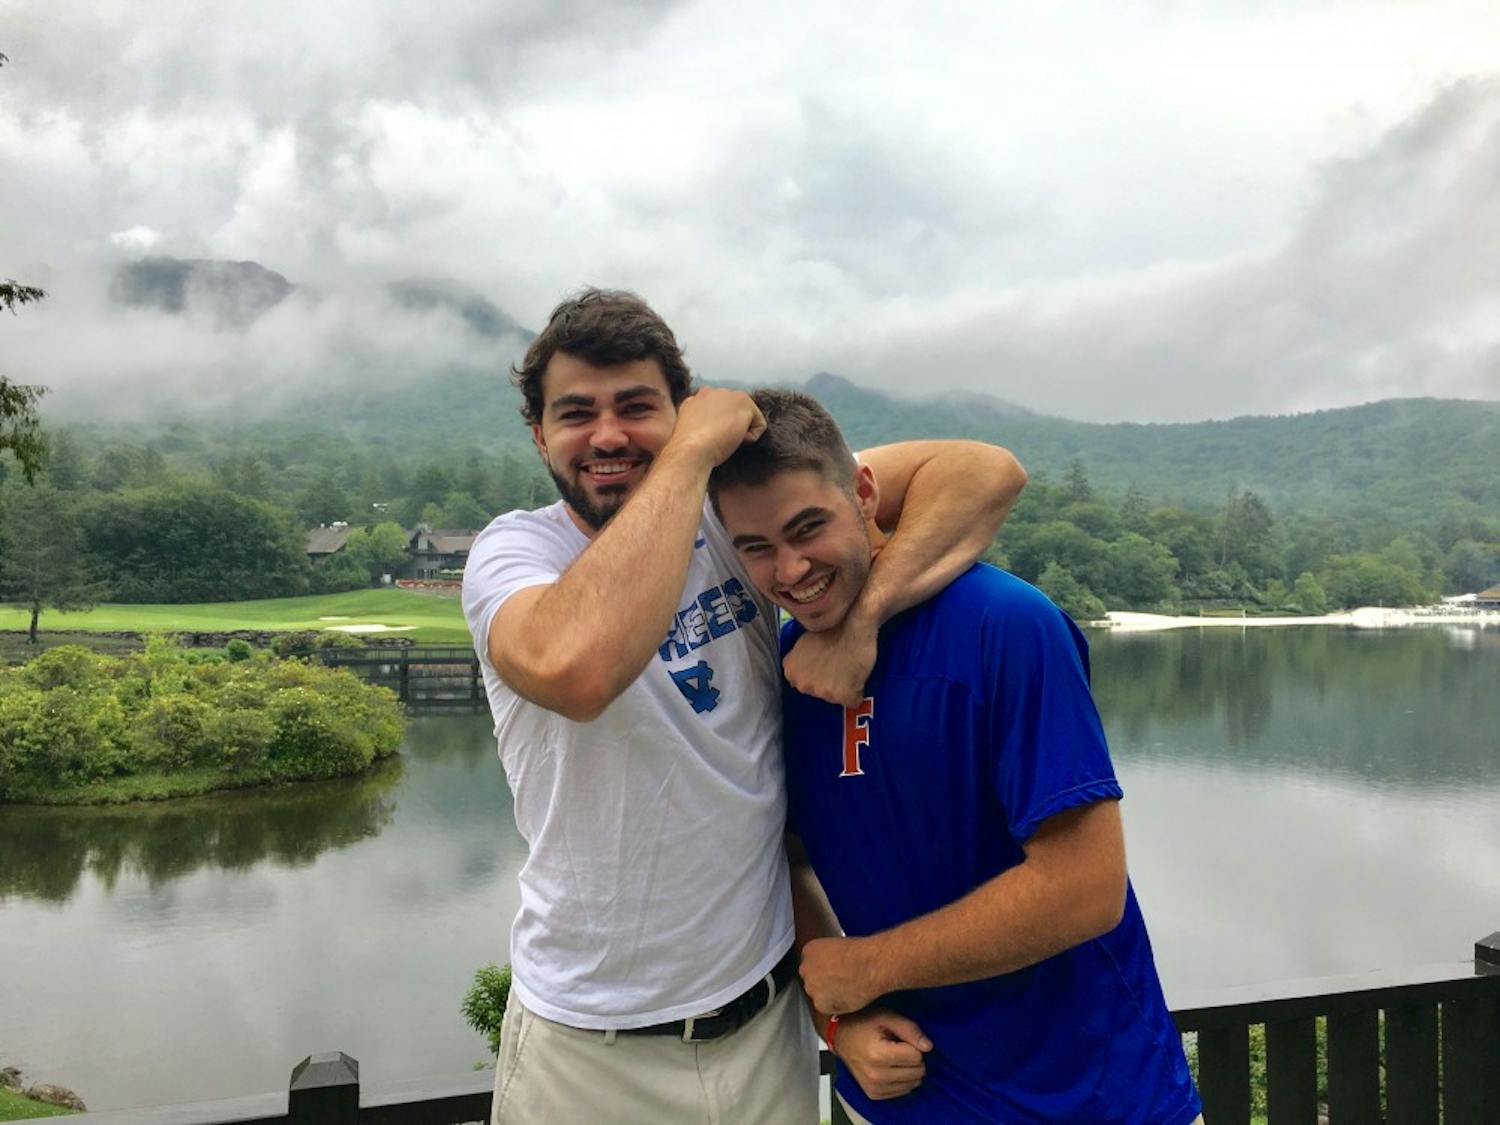 Luke Maye wraps his younger brother, Cole, in a headlock. Cole, who plays baseball at the University of Florida, insisted they switch roles in the next shot to keep things equal.